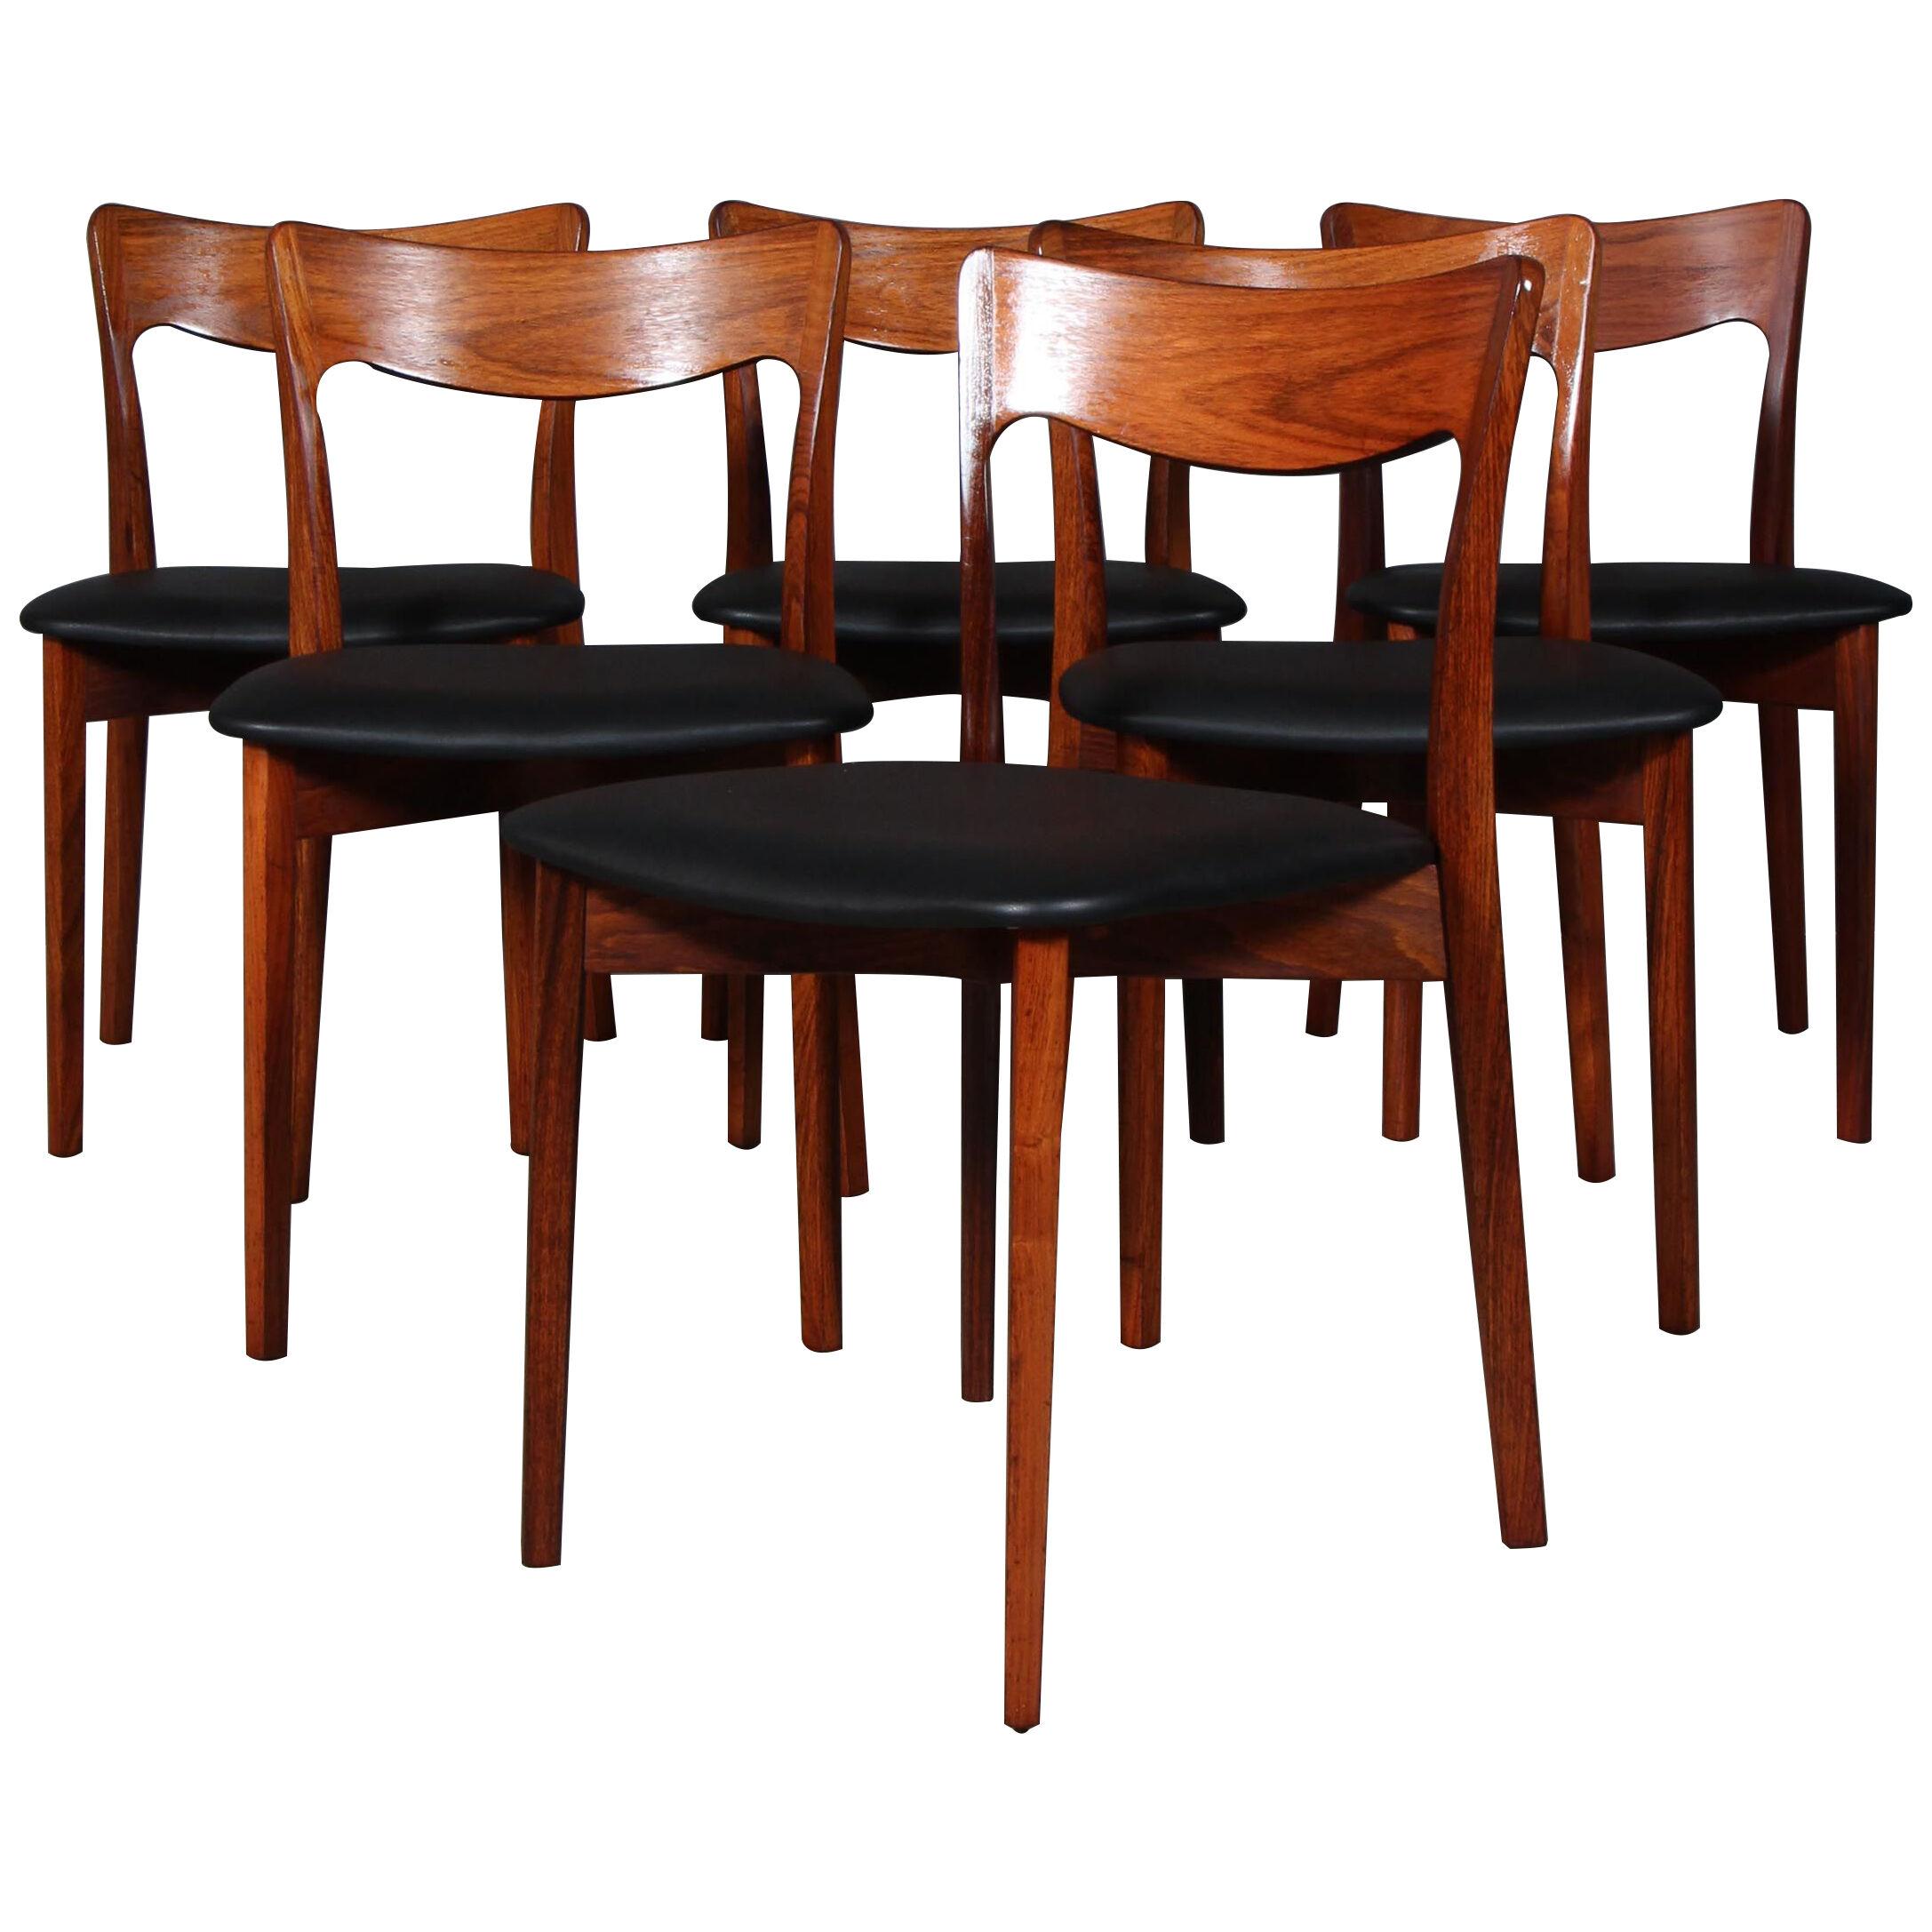 Harry Ostergaard, Set of Dining Chairs